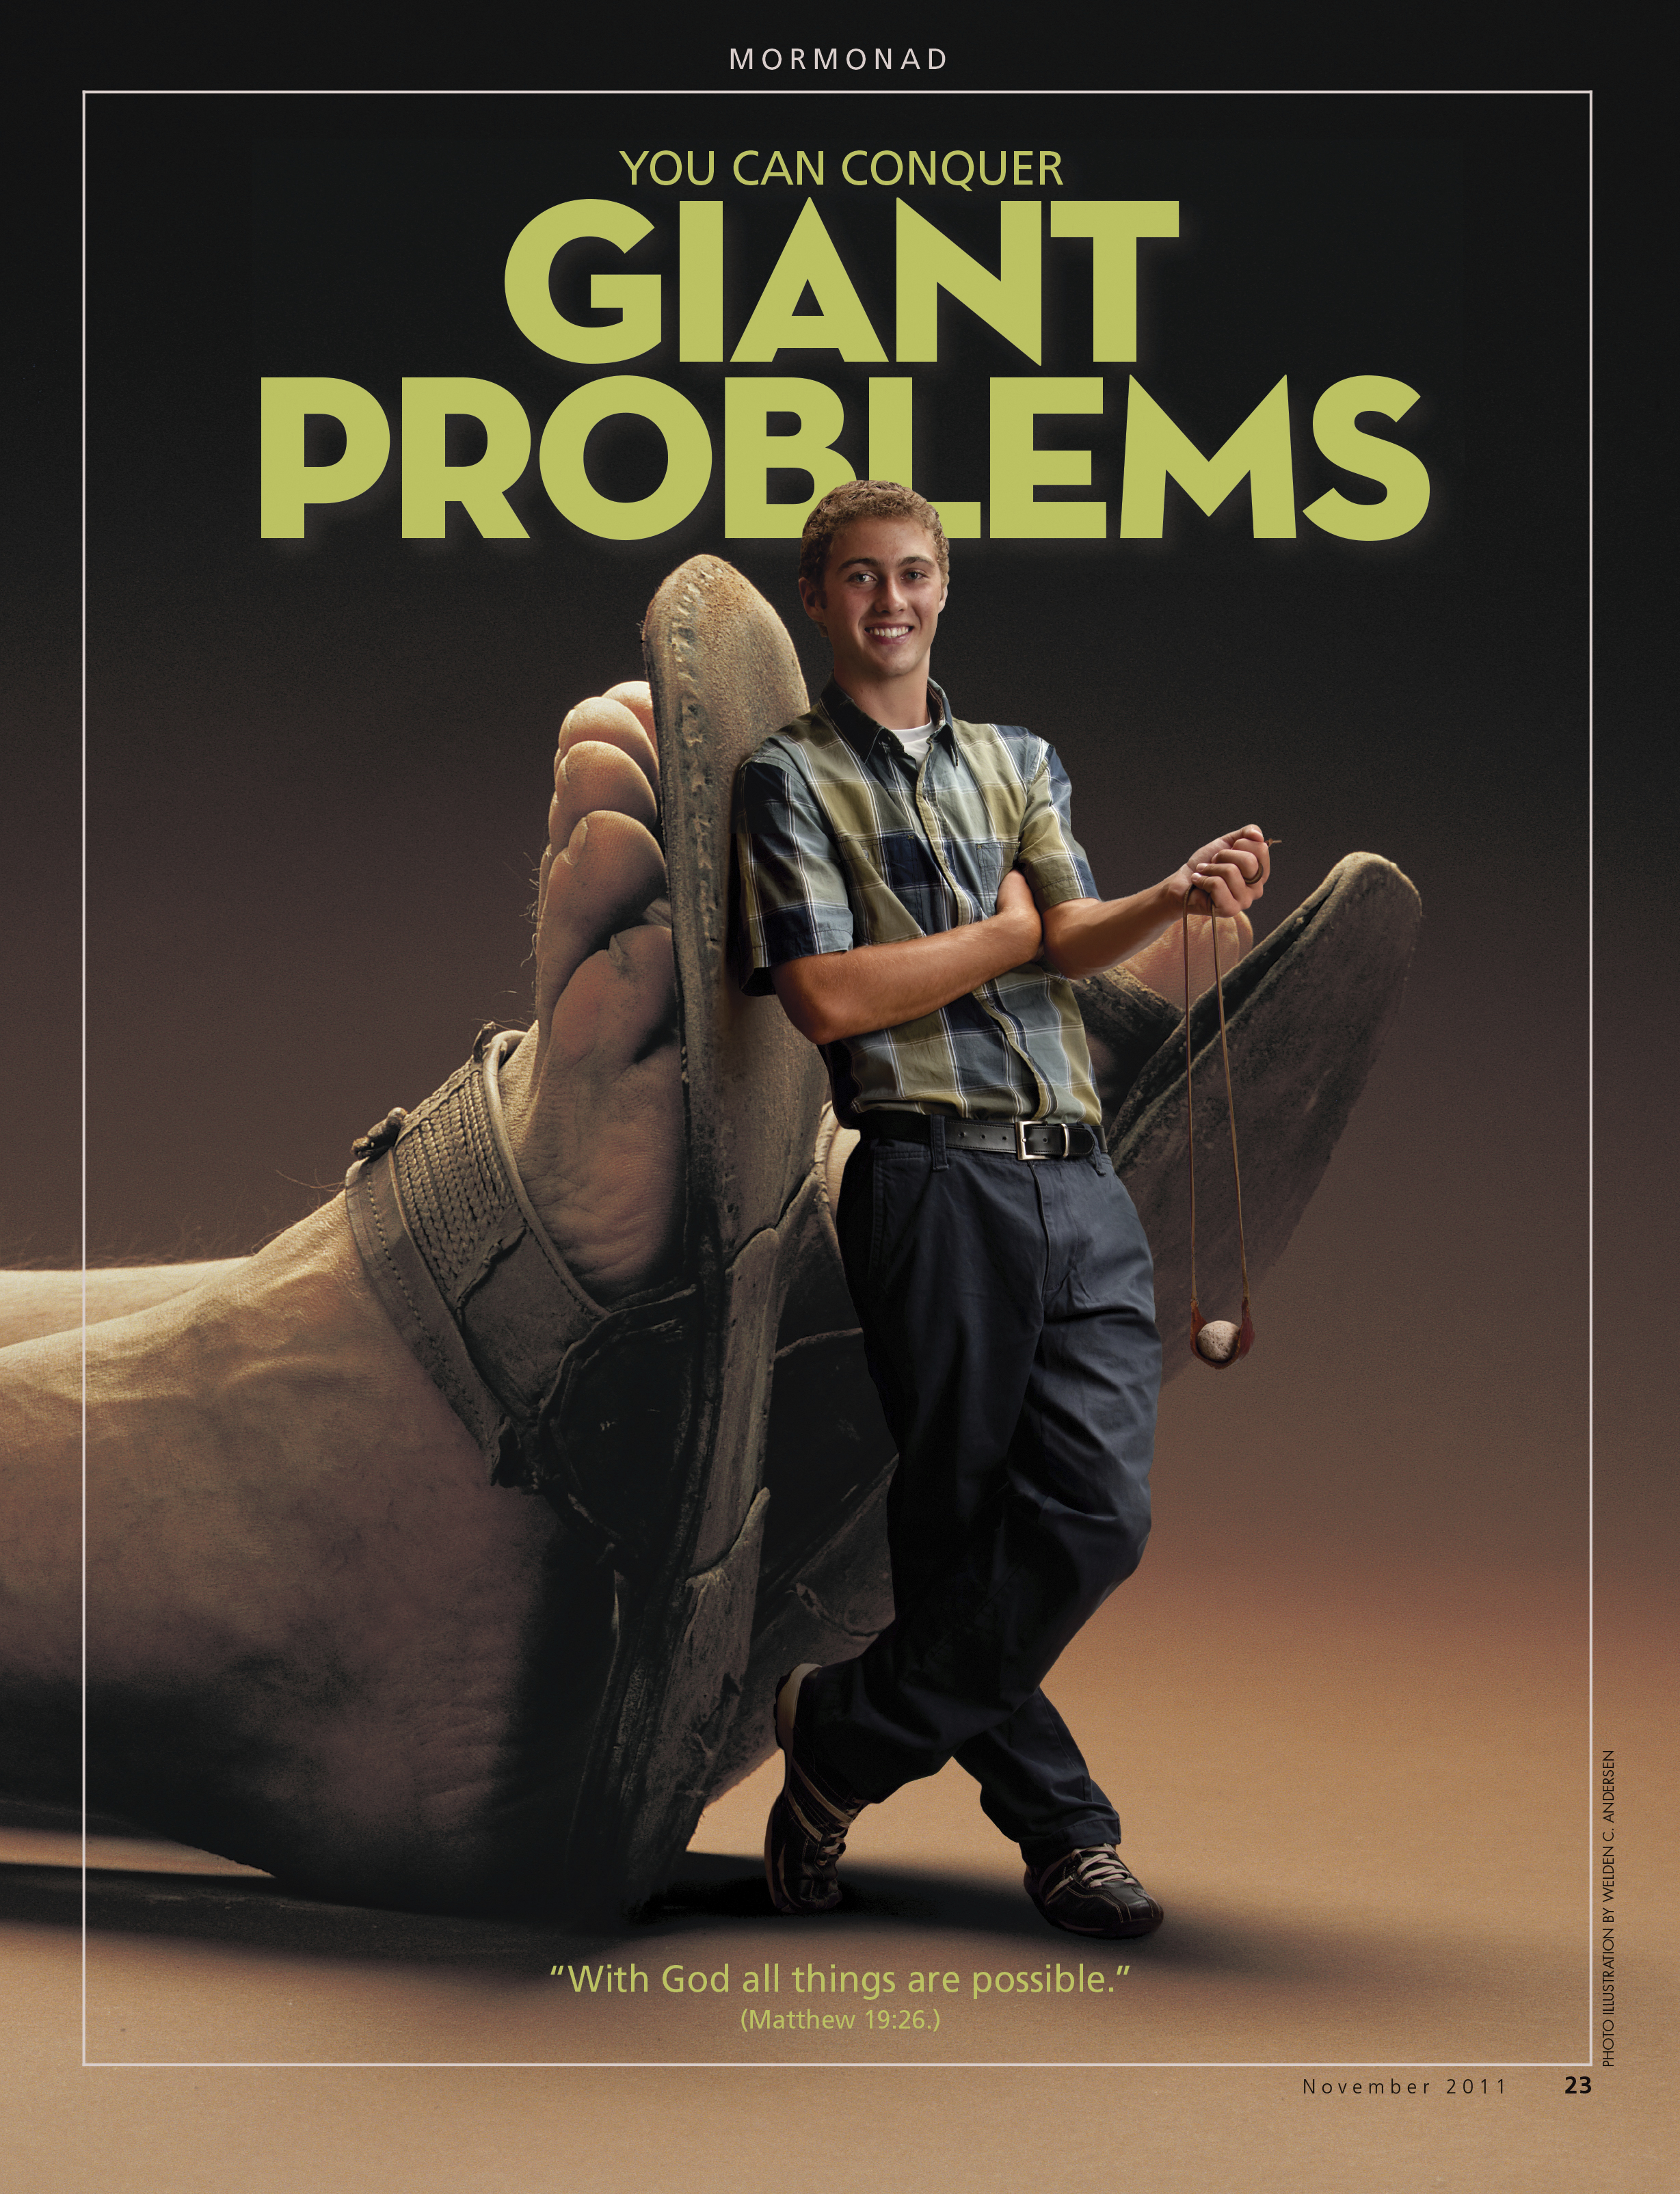 You Can Conquer Giant Problems. “With God all things are possible.” (Matthew 19:26.) Nov. 2011 © undefined ipCode 1.